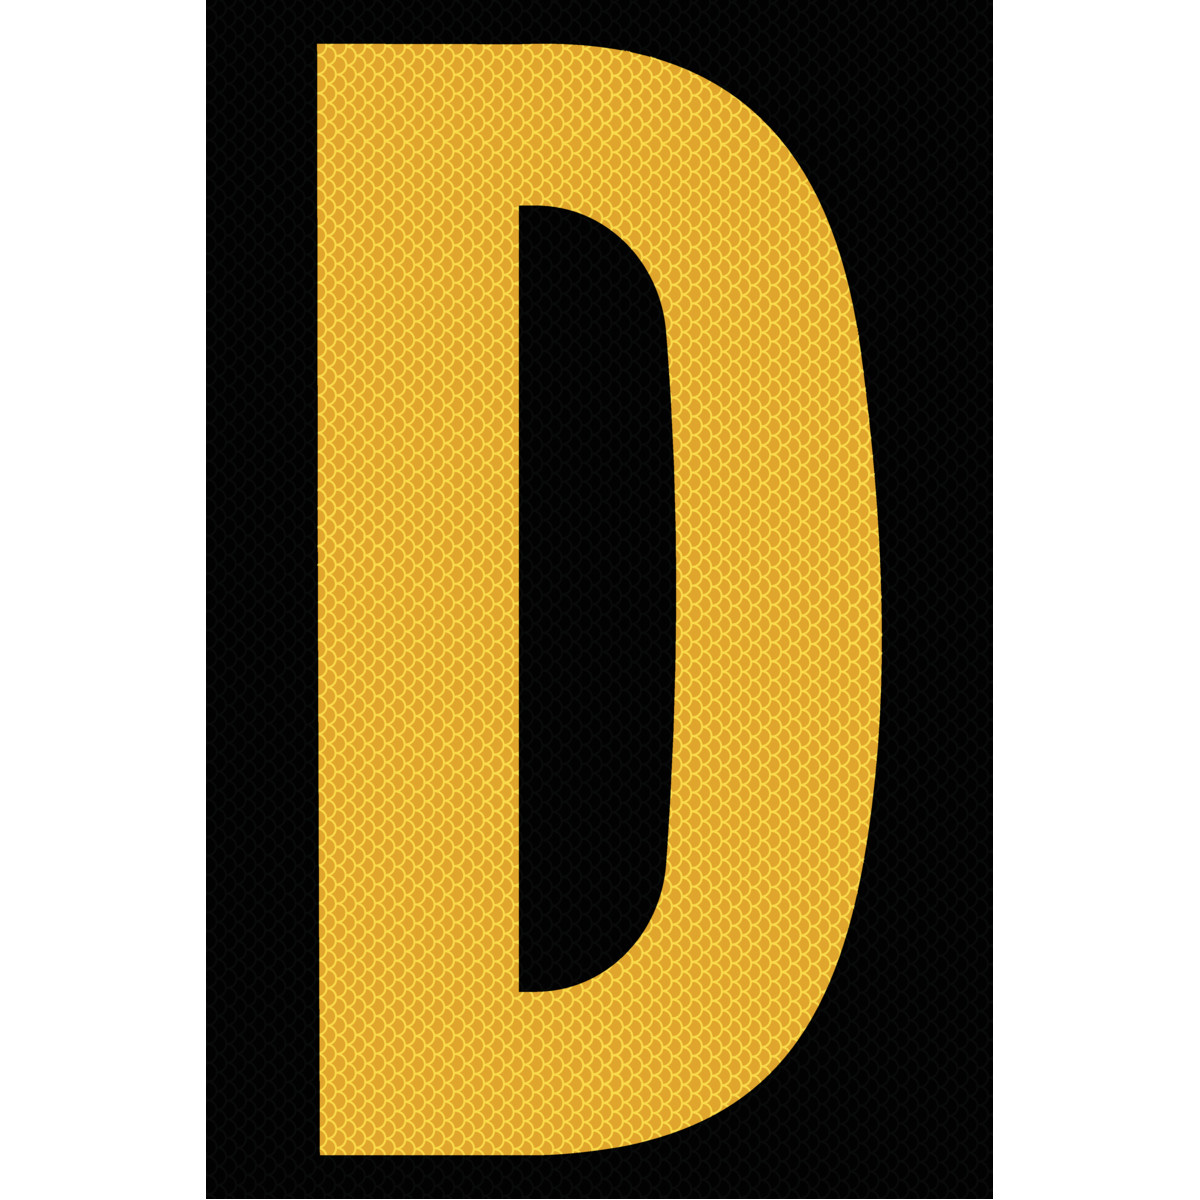 4" Yellow on Black High Intensity Reflective "D"